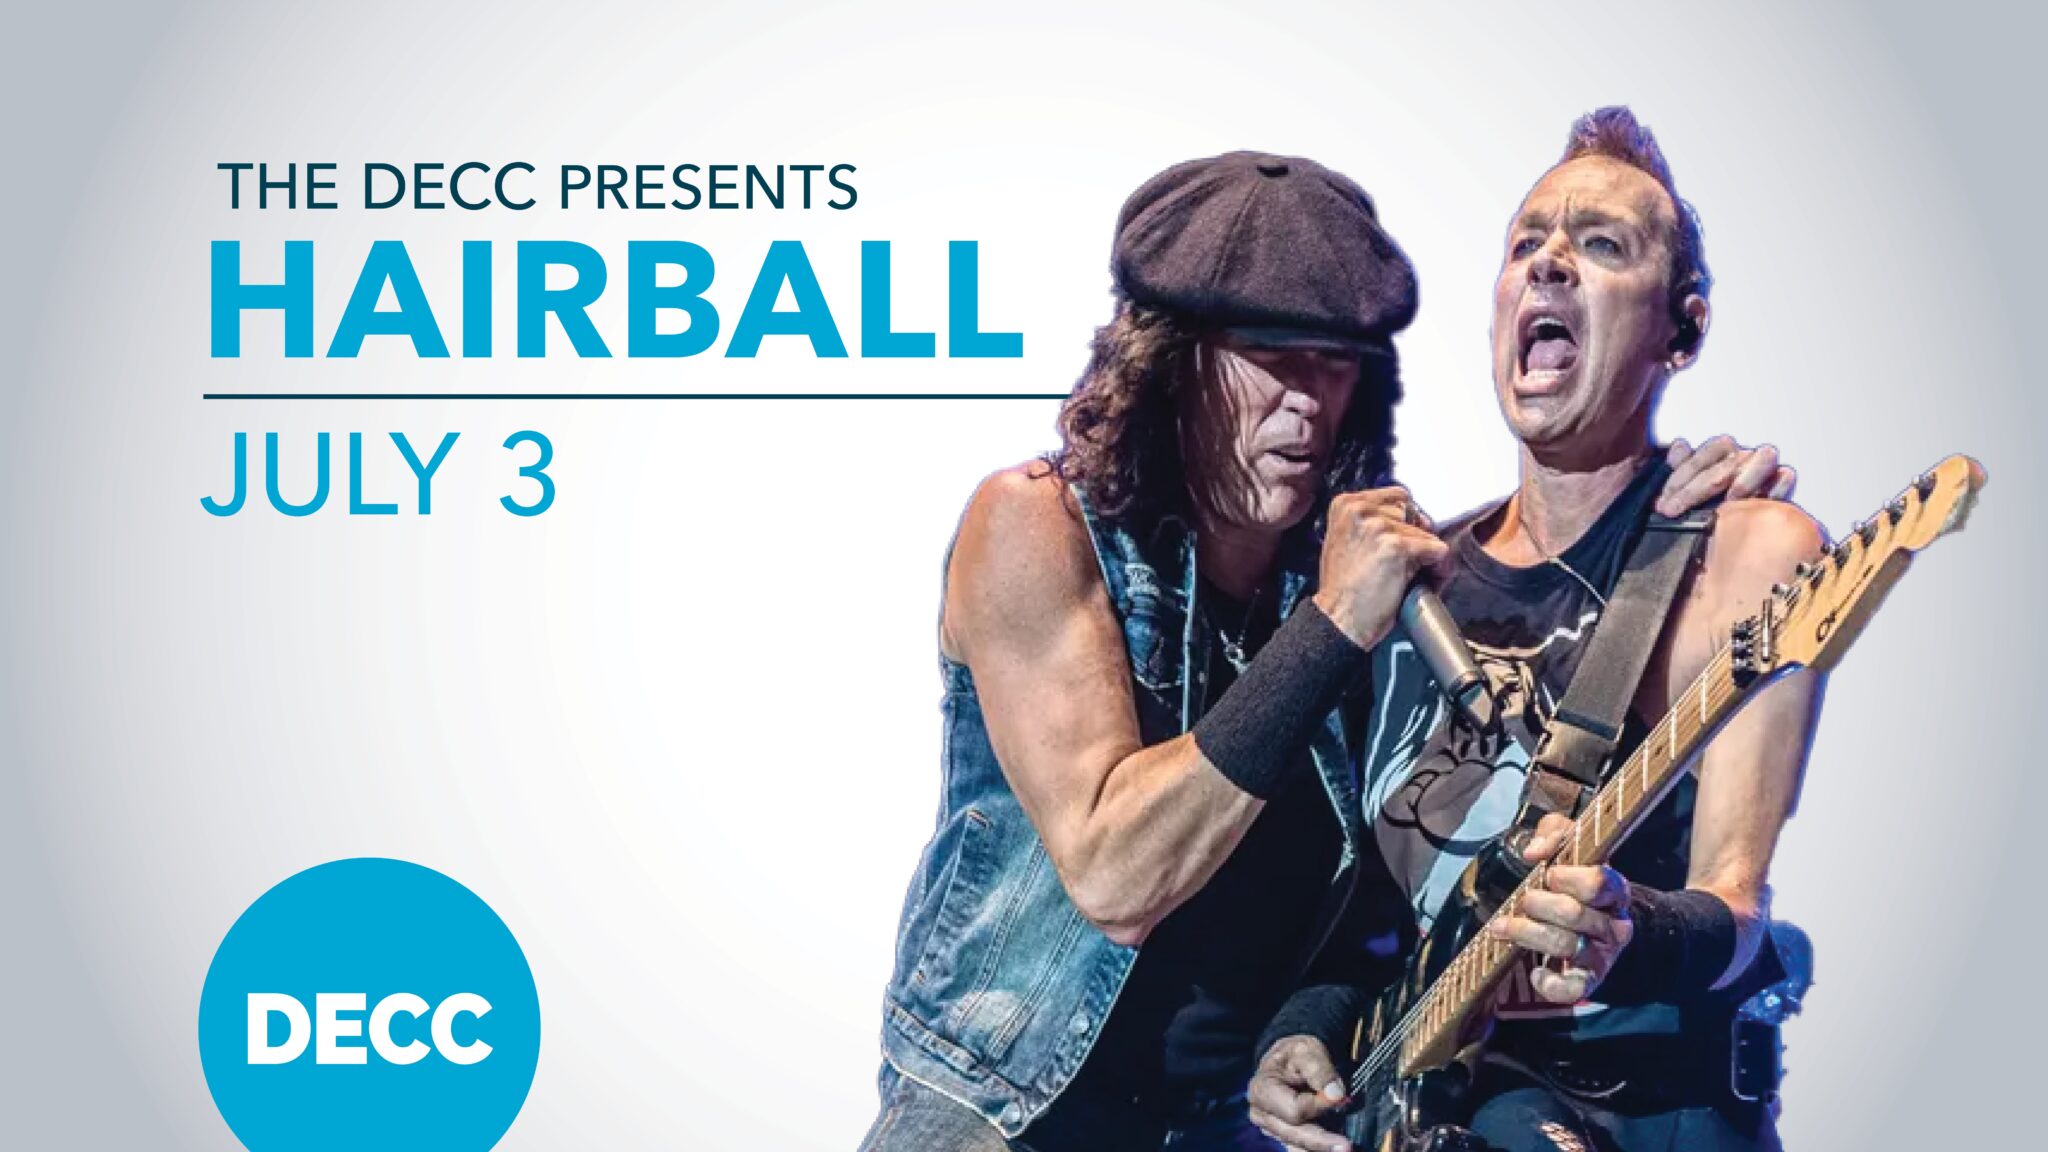 Hairball announces they'll be returning to Bayfront this summer